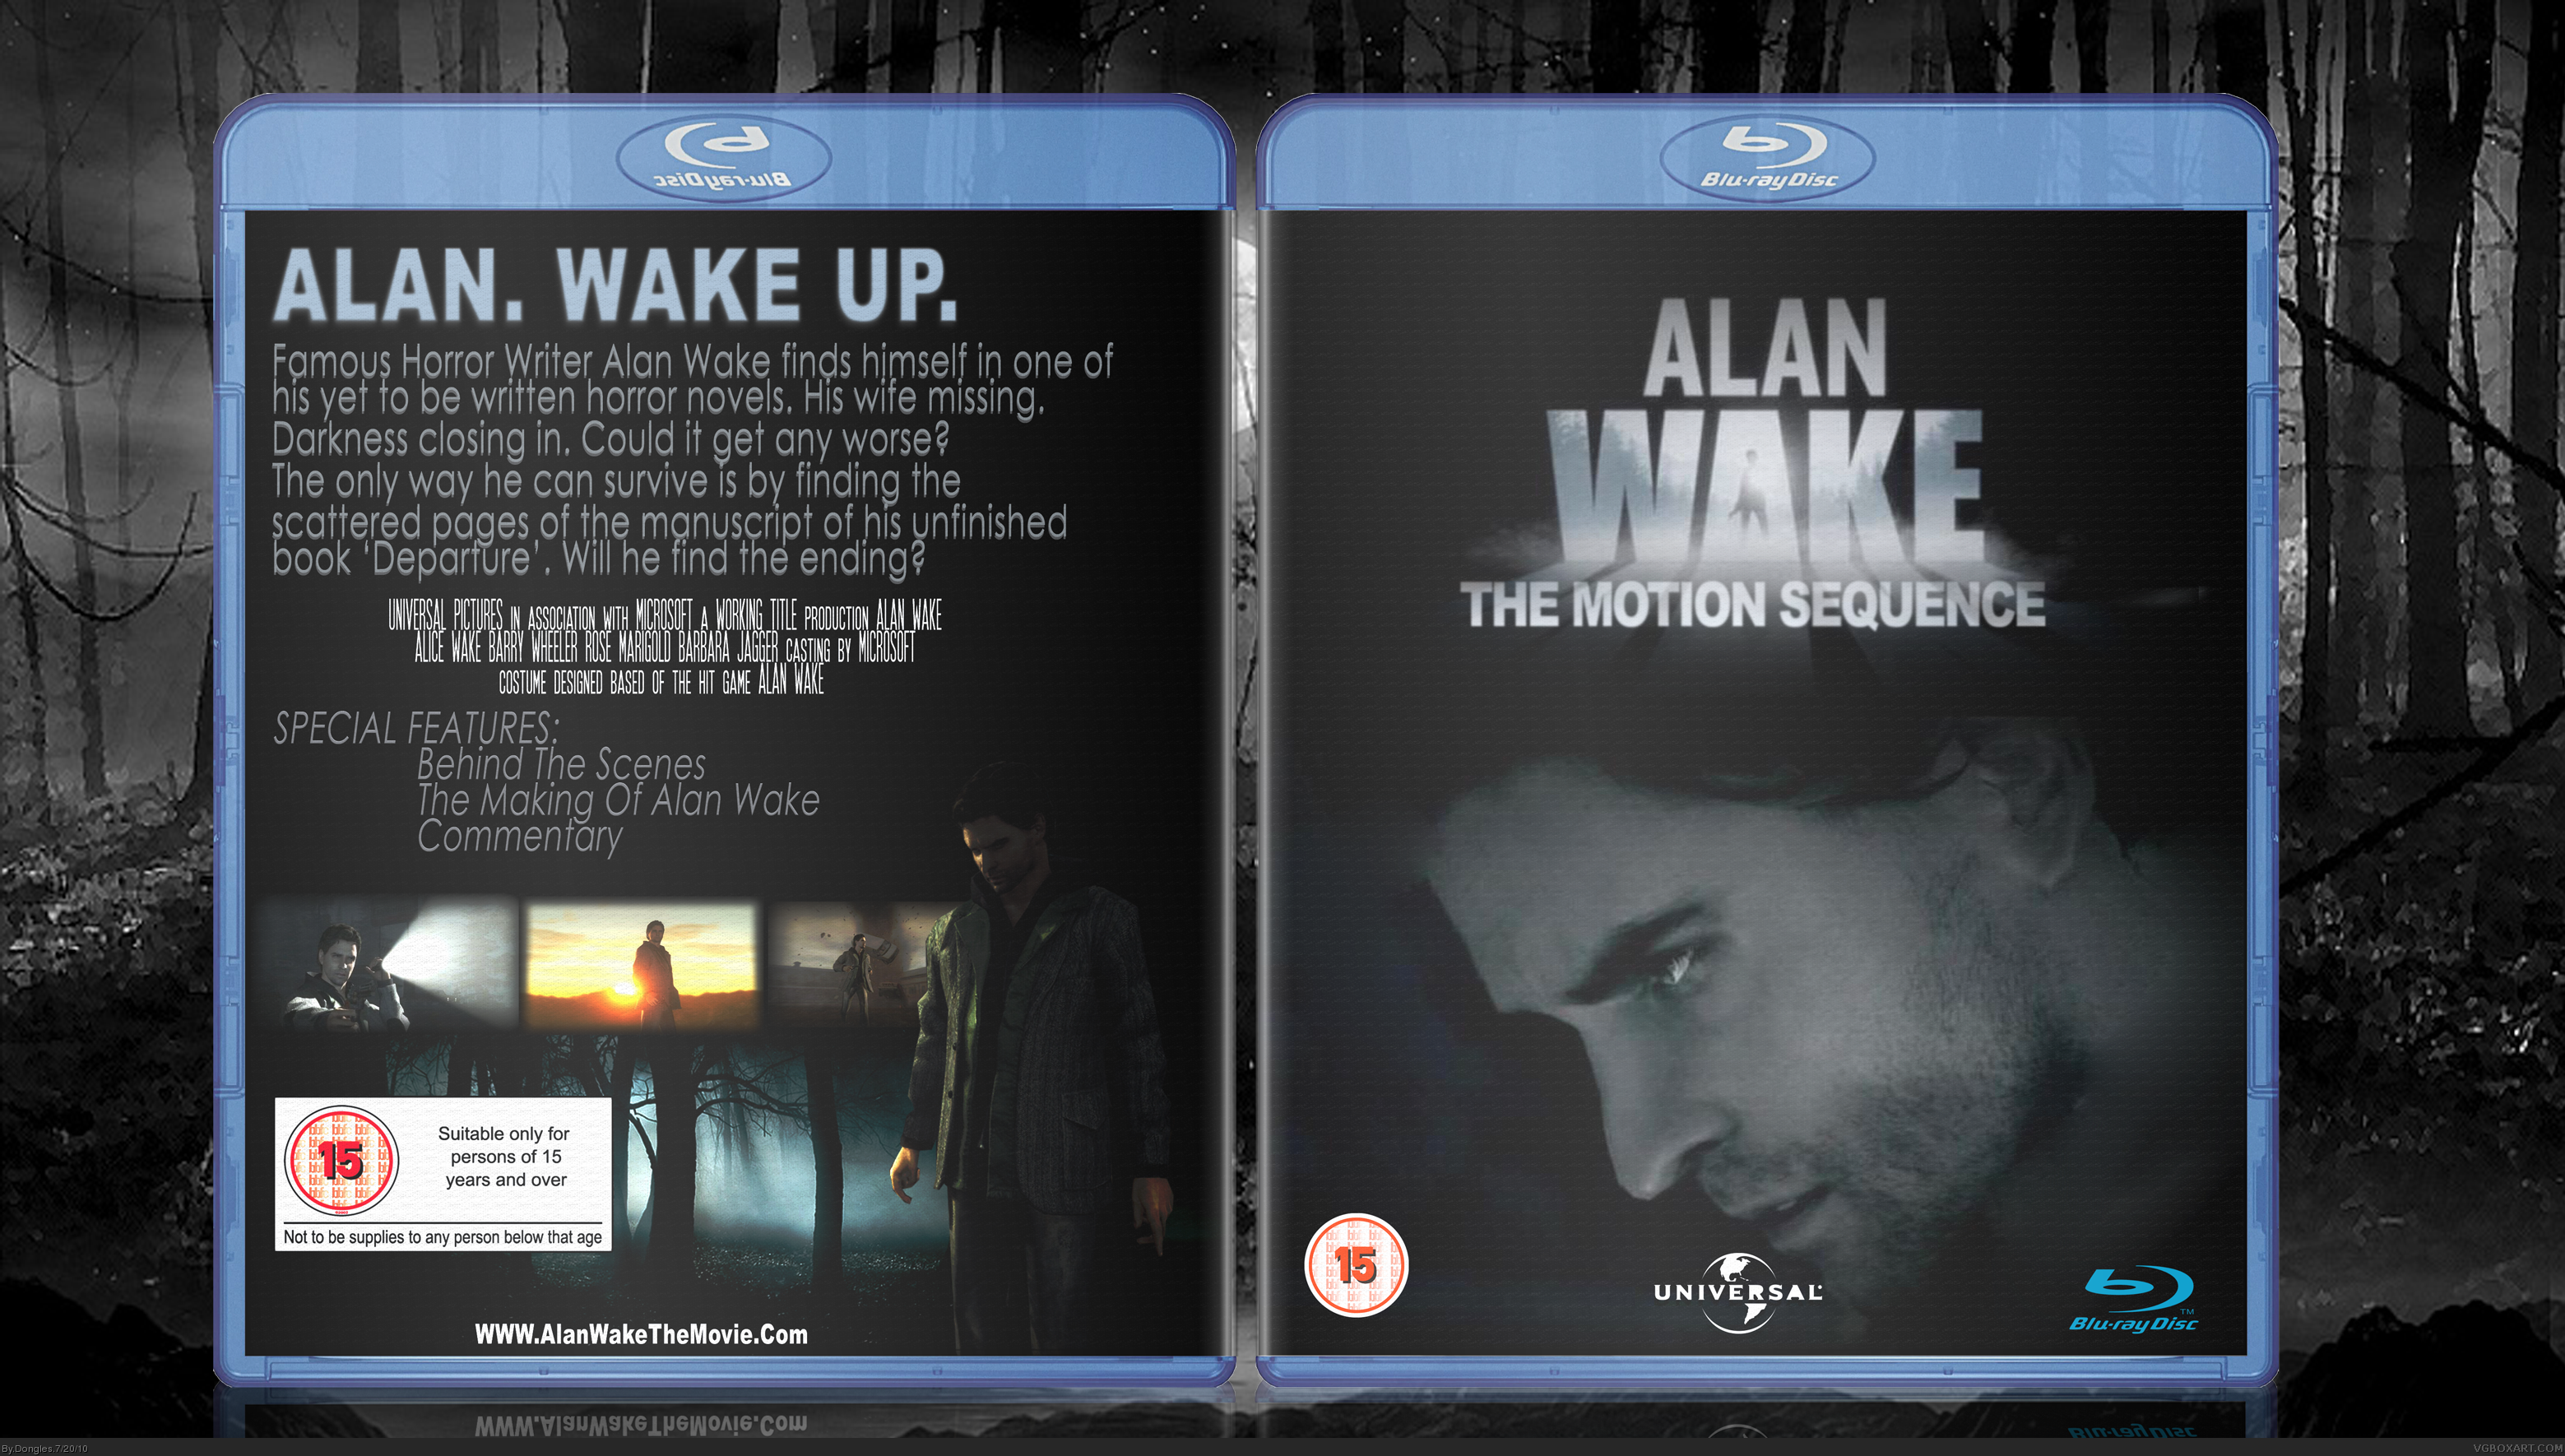 Alan Wake The Motion Sequence box cover